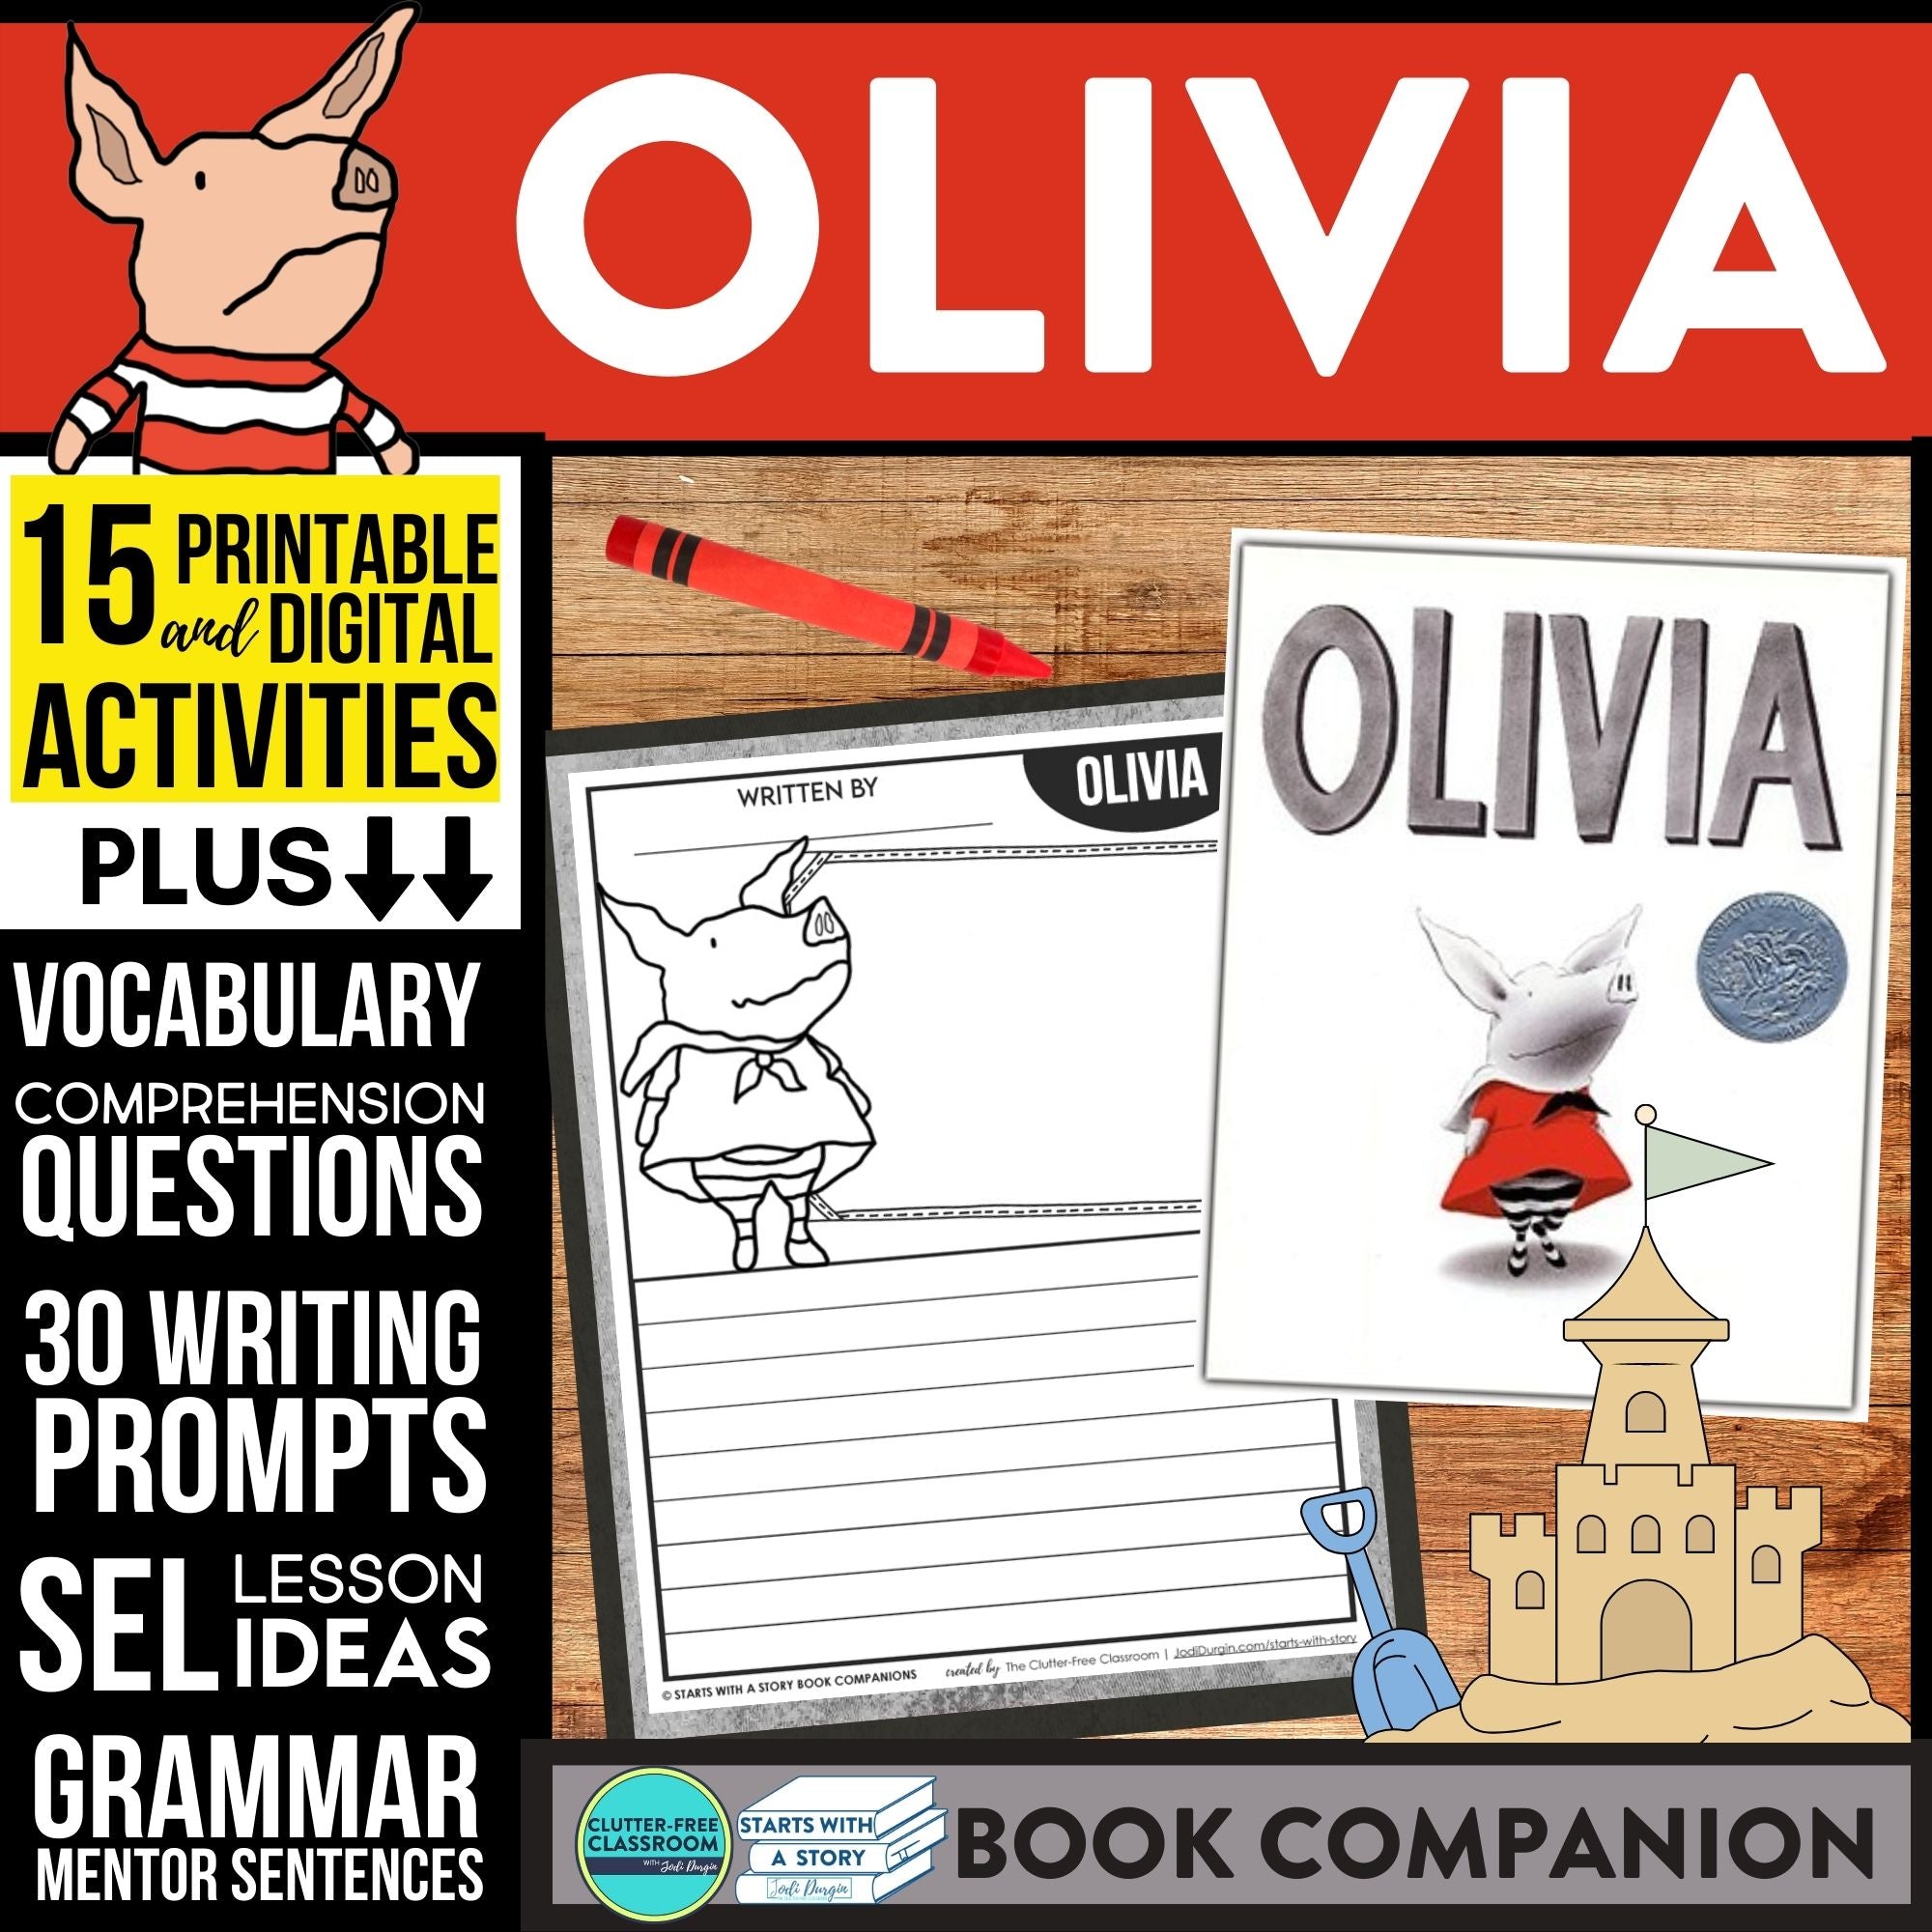 OLIVIA activities and lesson plan ideas